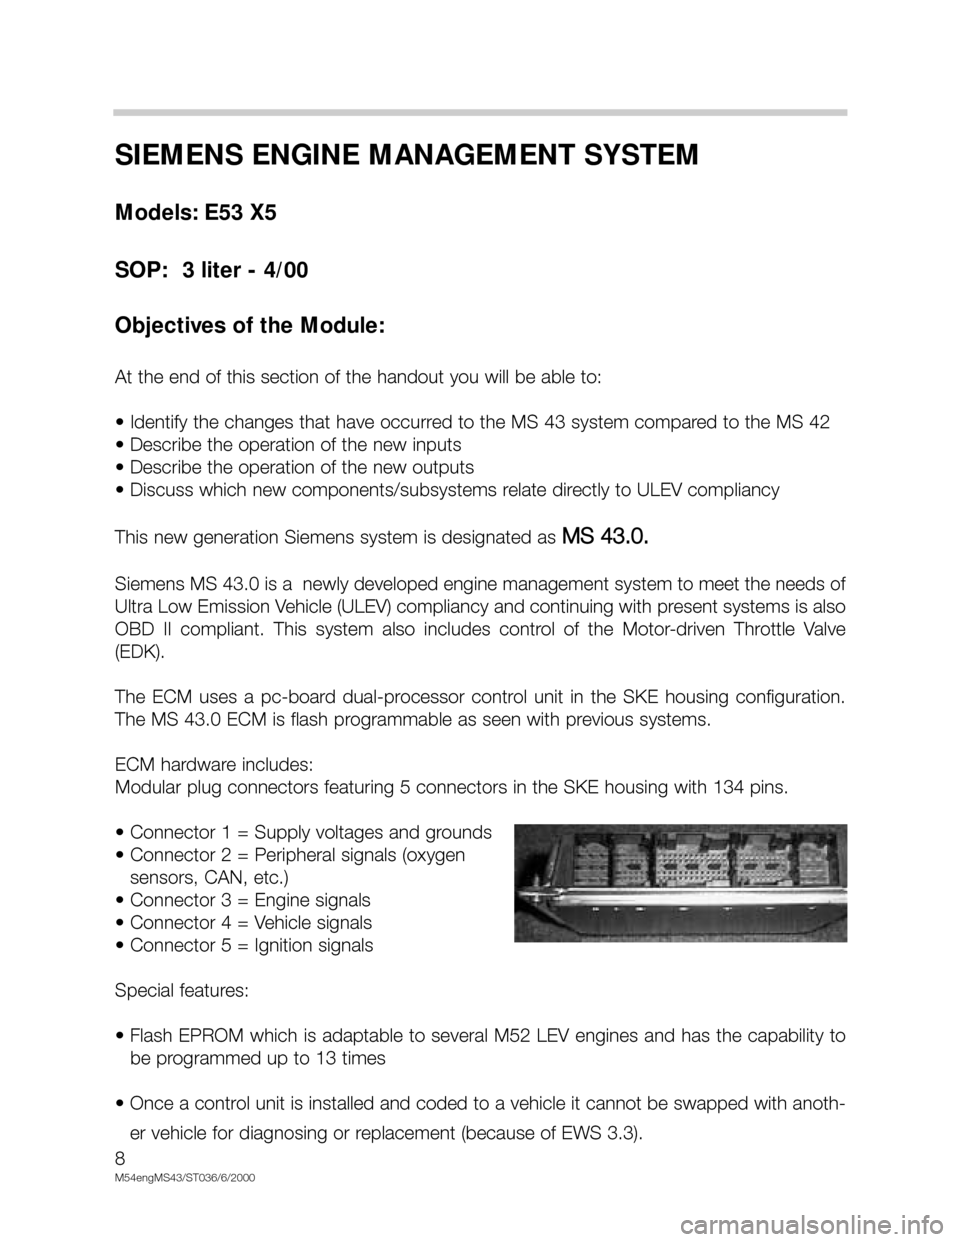 BMW X5 2004 E53 M54 Engine Workshop Manual 8
M54engMS43/ST036/6/2000
SIEMENS ENGINE MANAGEMENT SYSTEM
Models: E53 X5
SOP:  3 liter - 4/00
Objectives of the Module:
At the end of this section of the handout you will be able to:
• Identify the